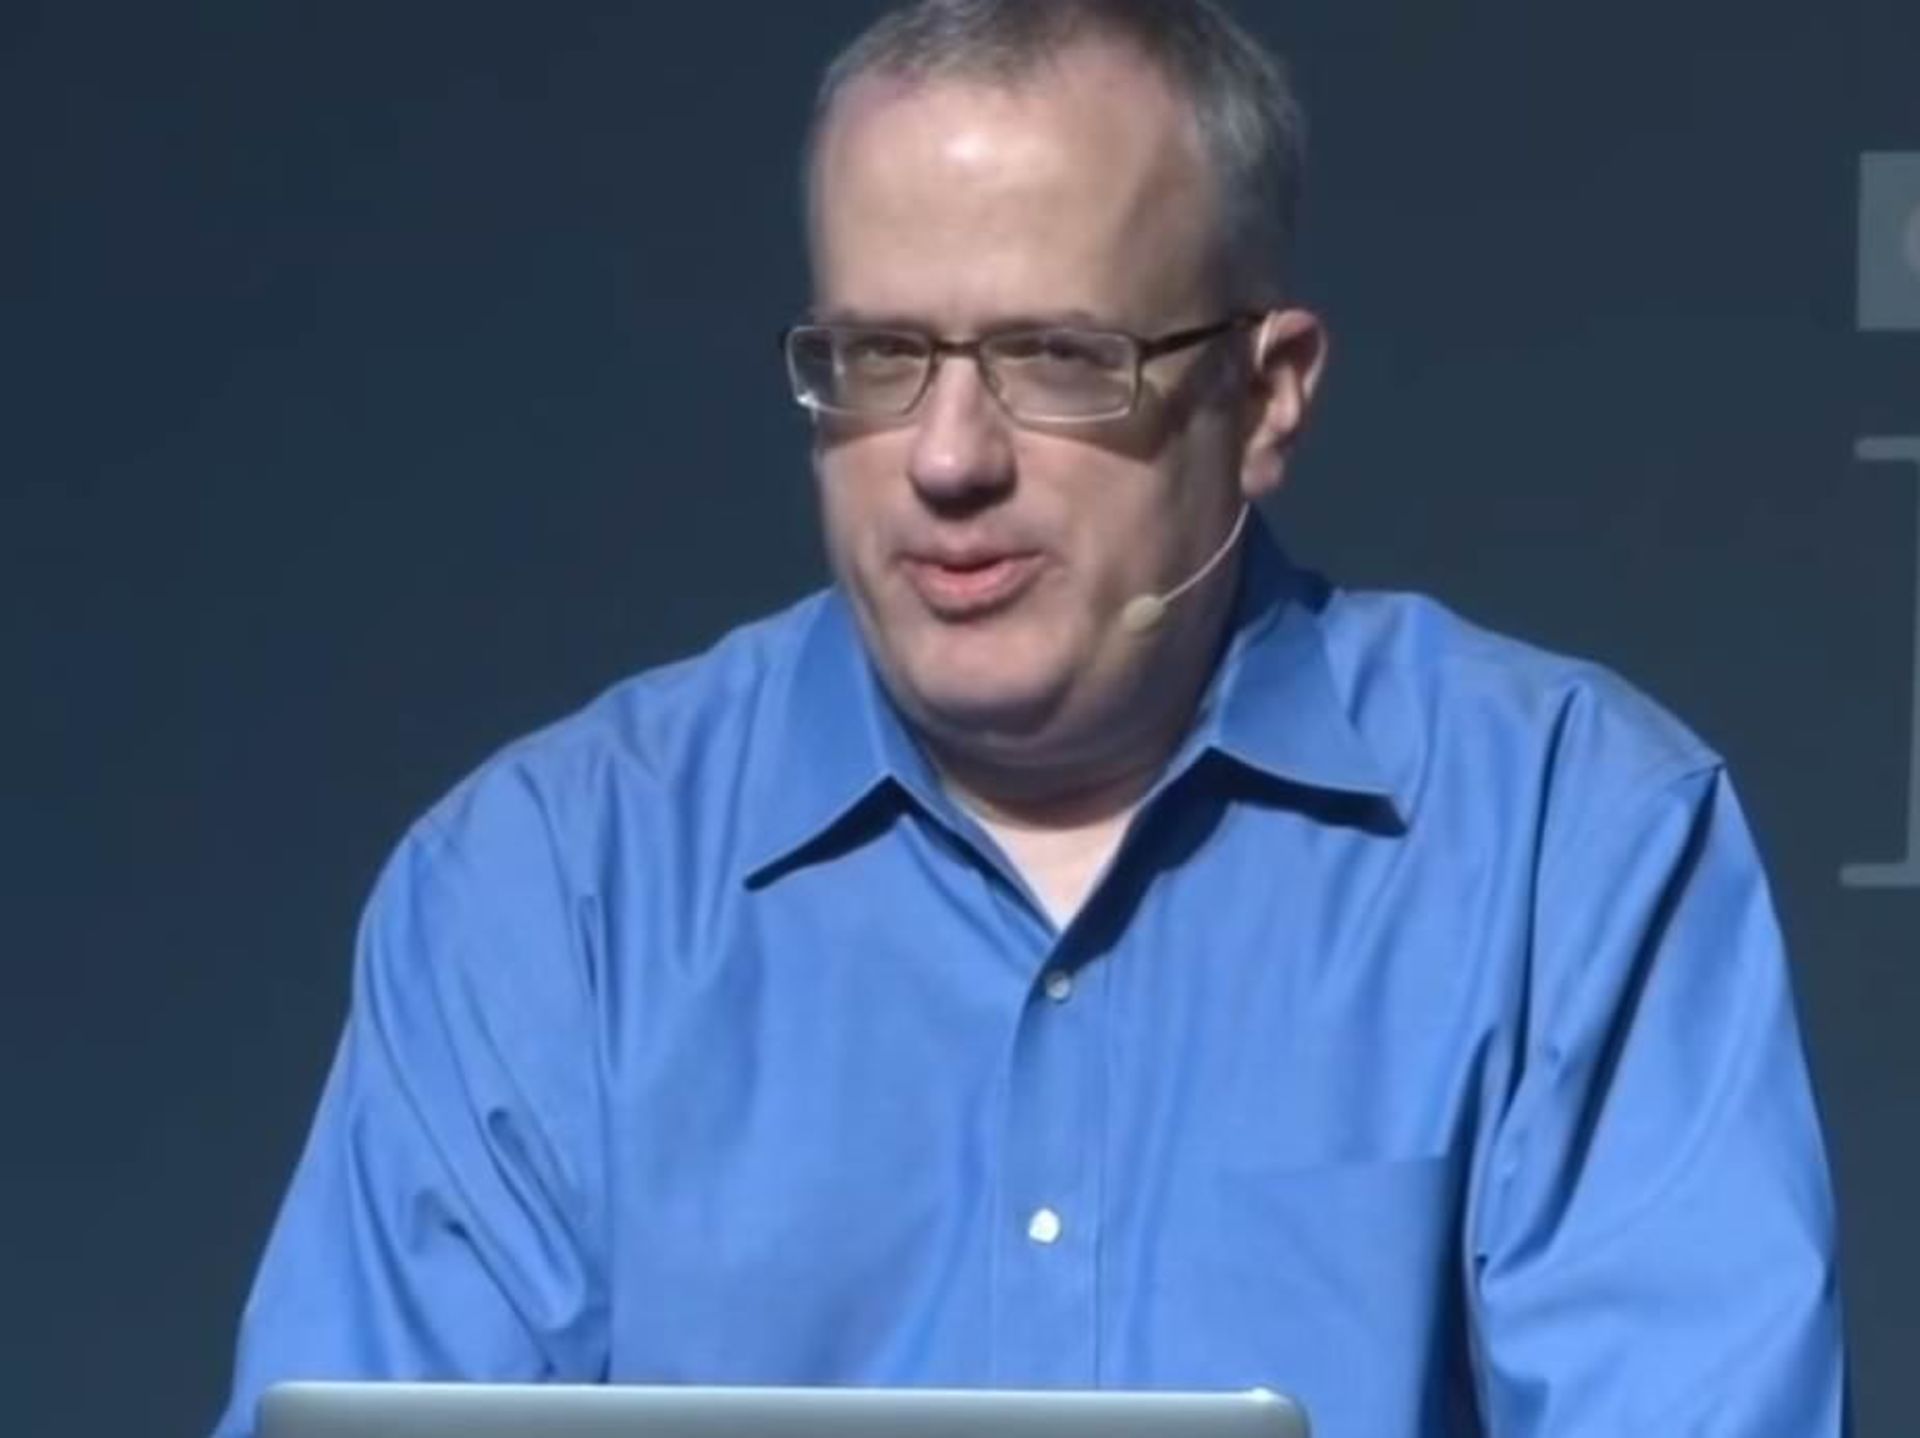 brendan eich is the inventor of javascript which is basically the de facto standard for web app development